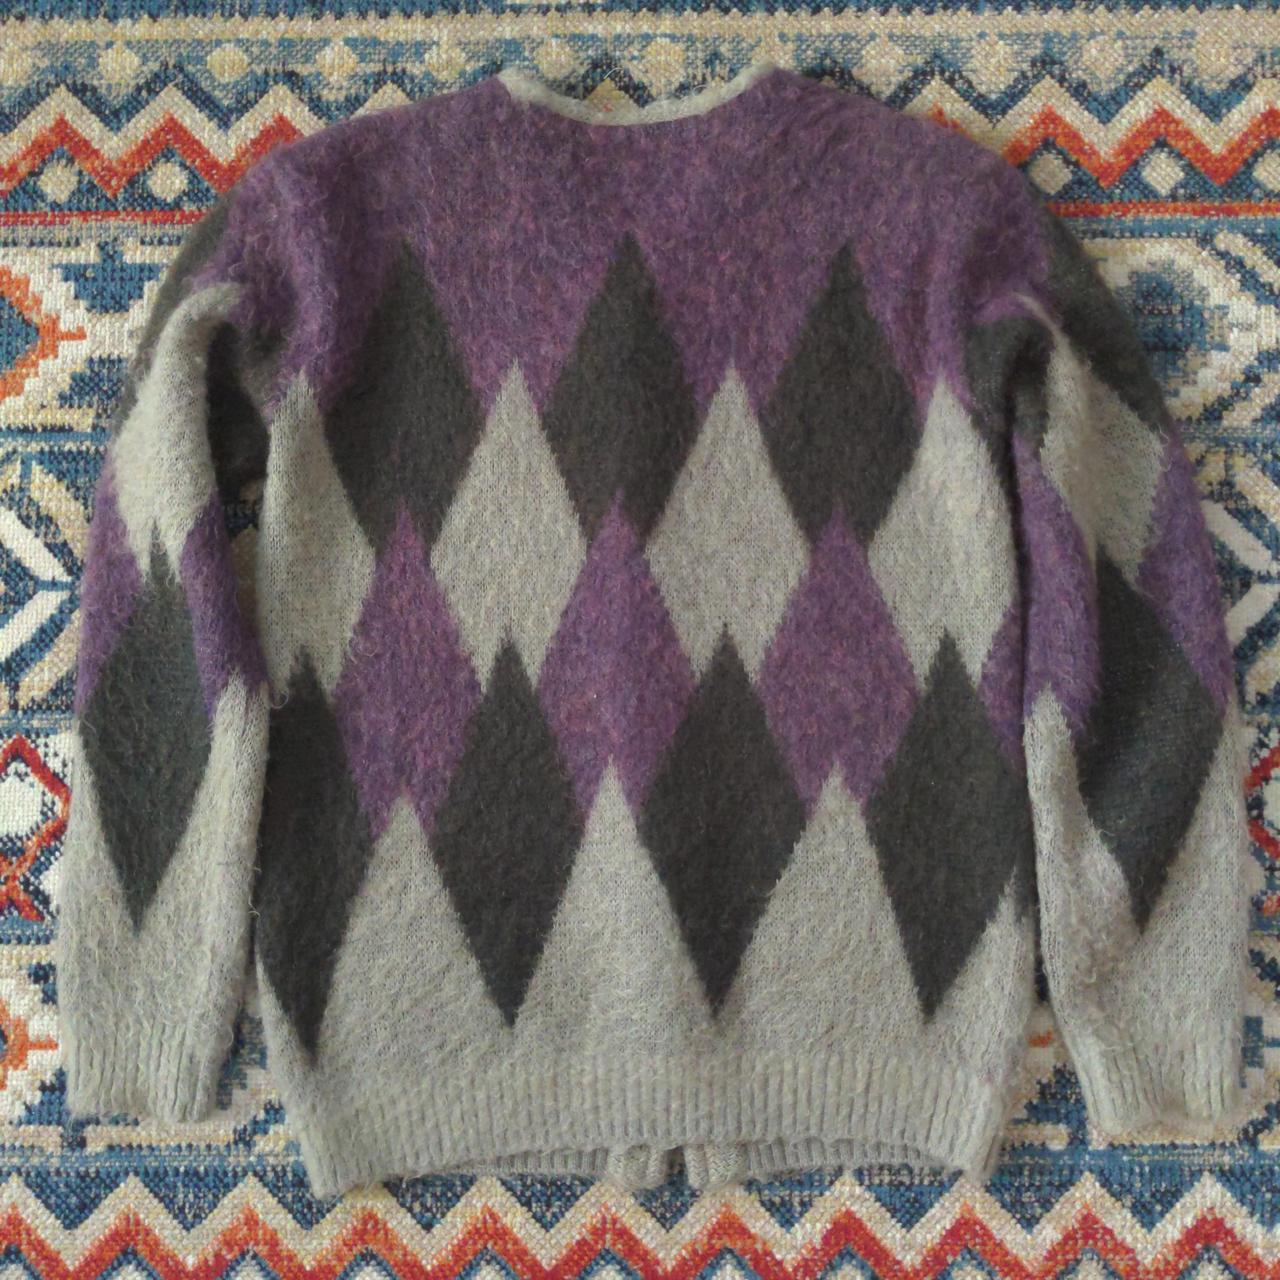 Product Image 3 - Needles Mohair Cardigan

This Cardigan was